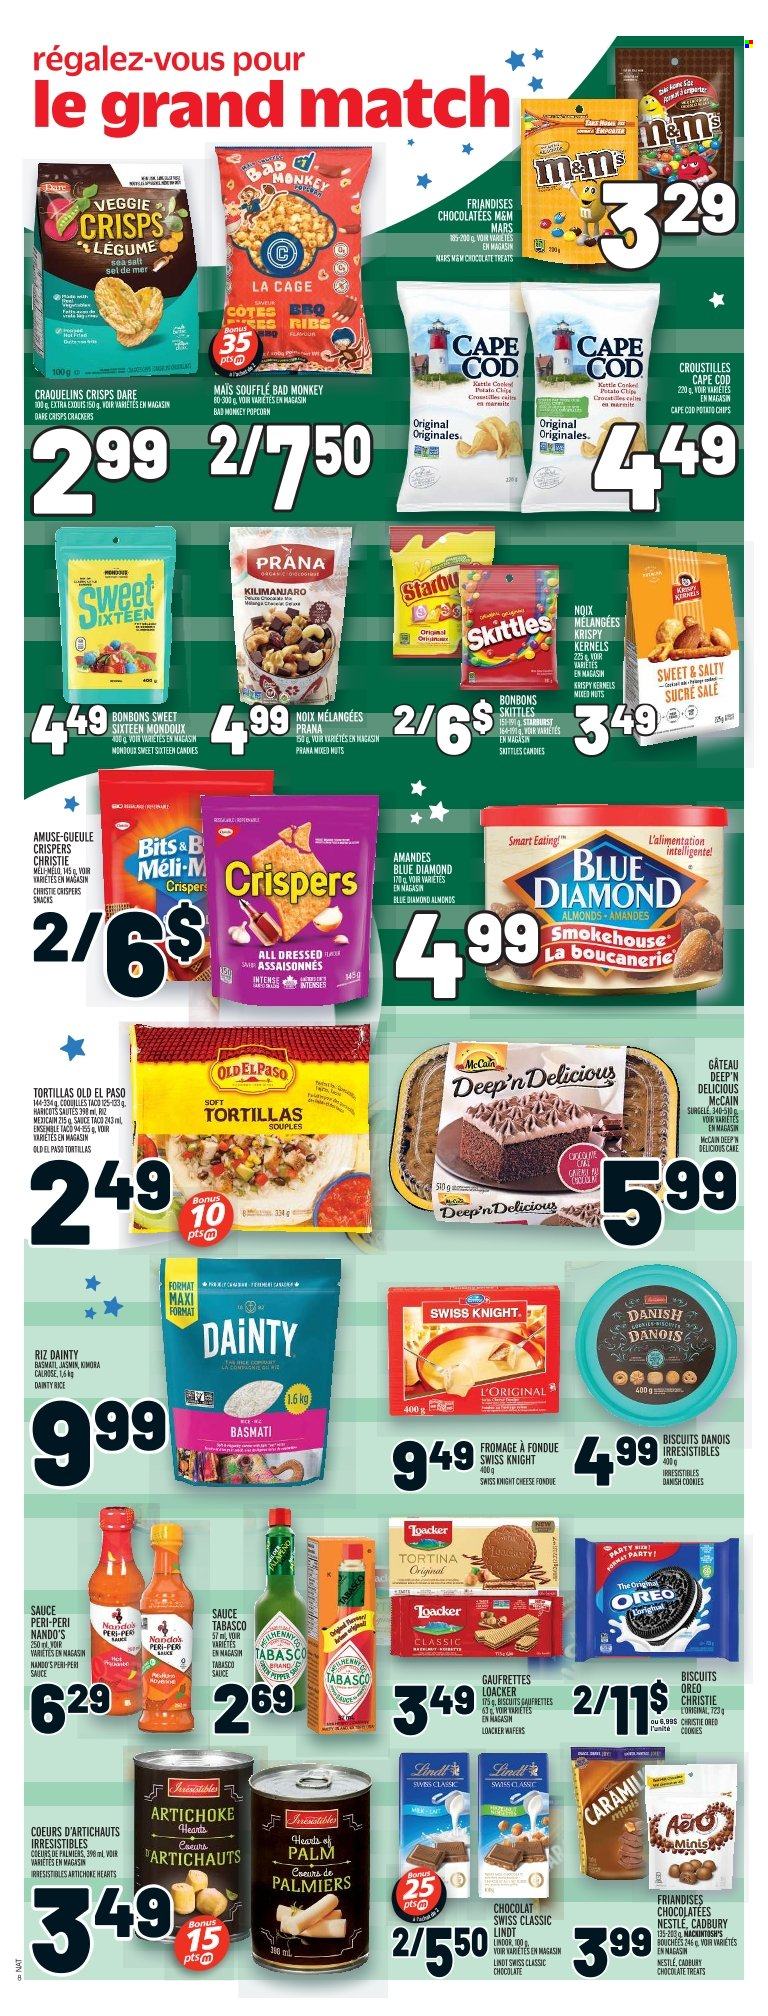 thumbnail - Metro Flyer - February 09, 2023 - February 15, 2023 - Sales products - tortillas, cake, Old El Paso, artichoke, hearts of palm, cod, sauce, milk, McCain, cookies, wafers, chocolate, snack, Mars, crackers, biscuit, Cadbury, Skittles, Starburst, potato chips, chips, popcorn, tabasco, basmati rice, rice, almonds, mixed nuts, Blue Diamond, ribs, cage, Nestlé, Oreo, Lindt, Lindor, M&M's. Page 10.